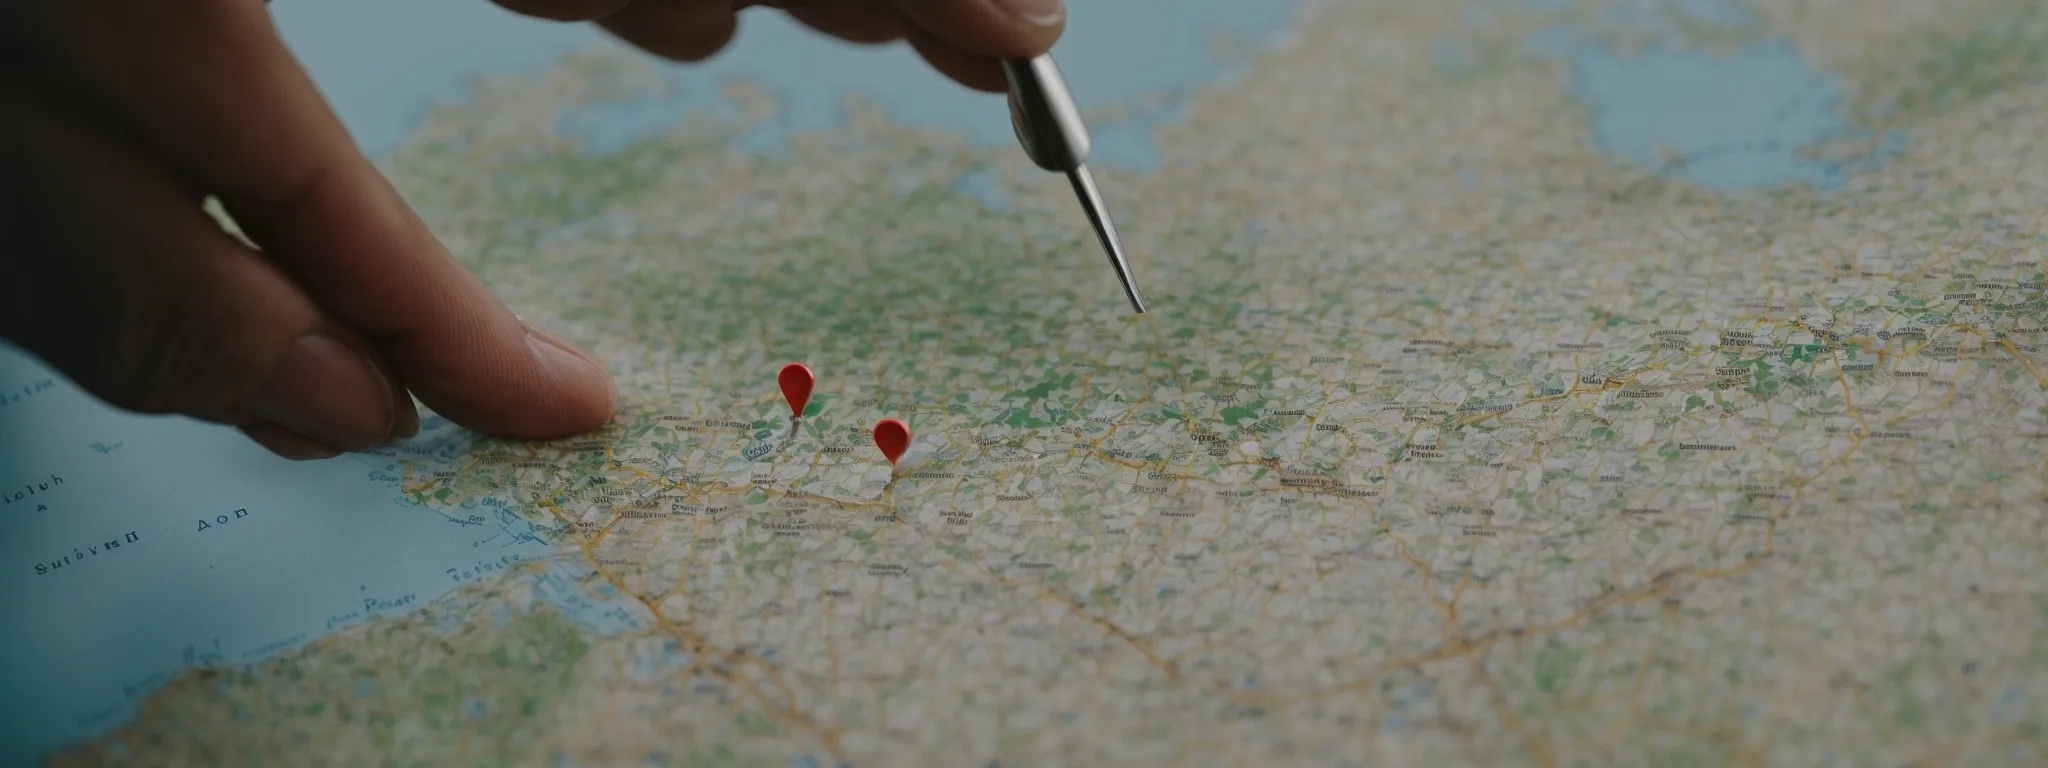 a business owner placing a pin on a map to symbolize pinpointing their store's location for optimized local search visibility.